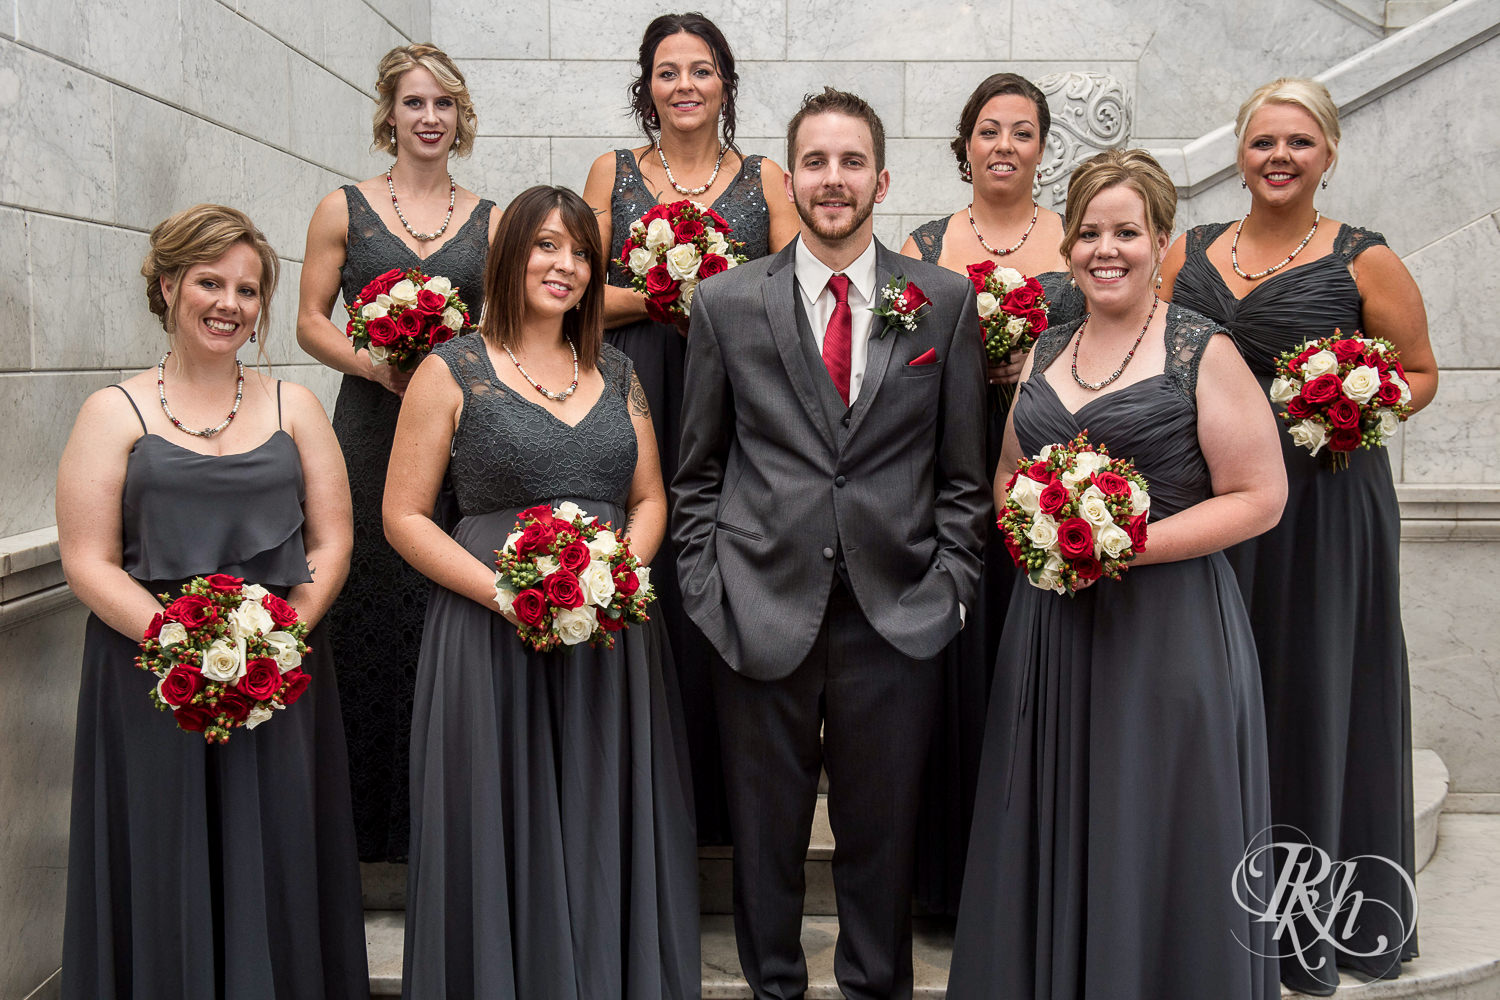 Wedding party smiles on wedding day at Lumber Exchange Event Center in Minneapolis, Minnesota.